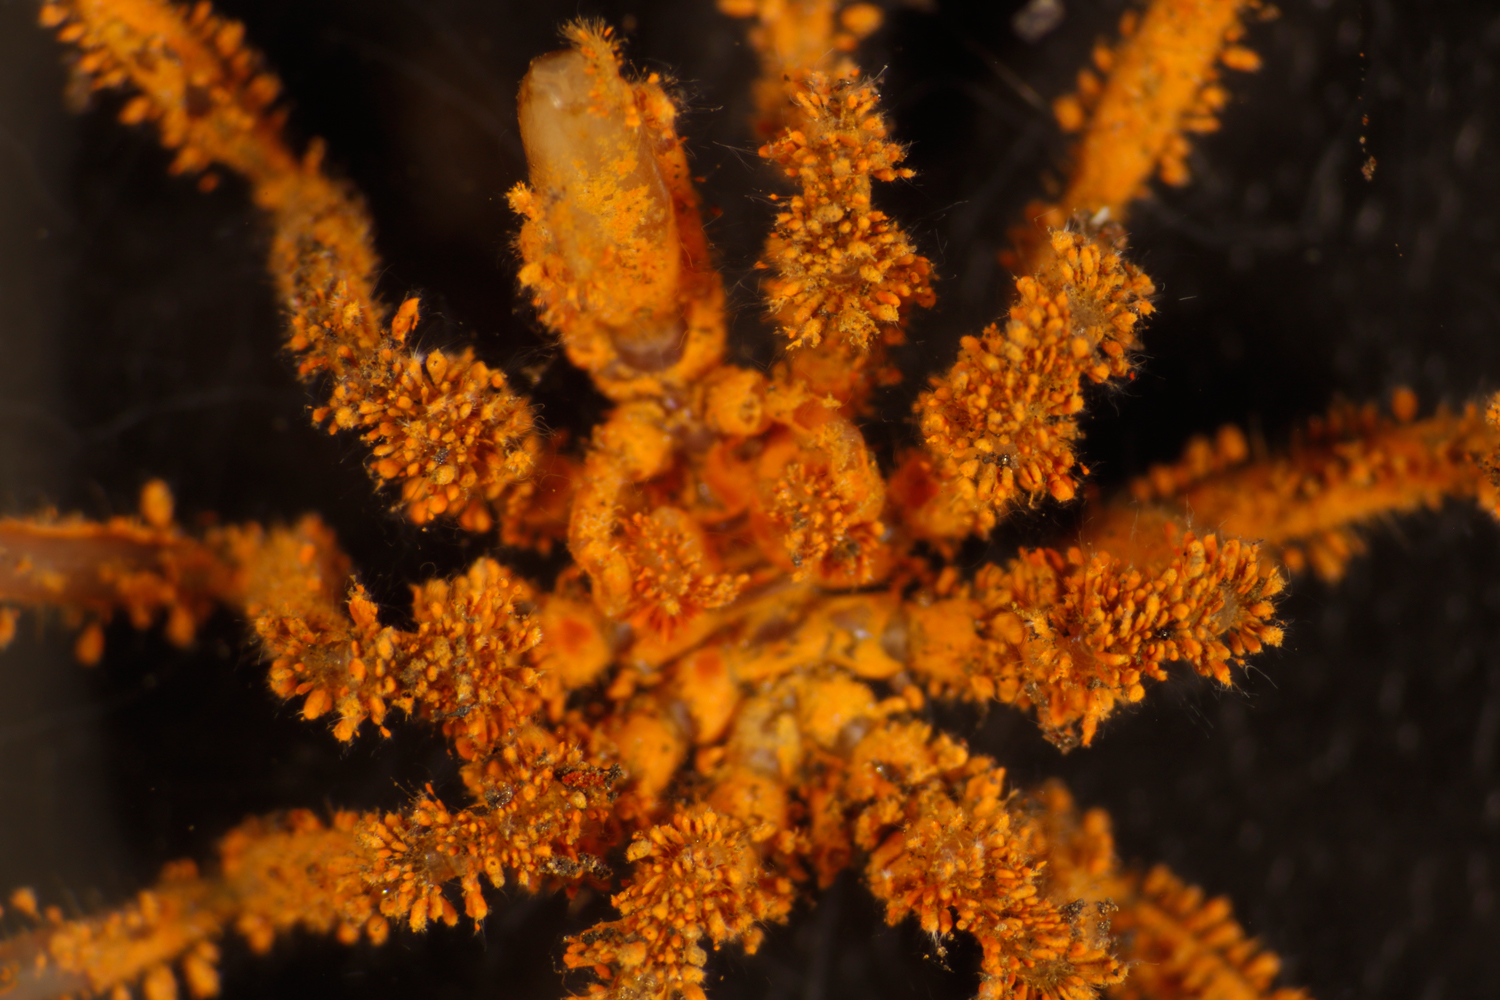 Underside of a sea spider Ammothea (the proboscis - head end - is toward the top). Its body and hairs are heavily coated with iron-rich encrustation as well as bacterial filaments. The normal color of this animal is pale yellow.